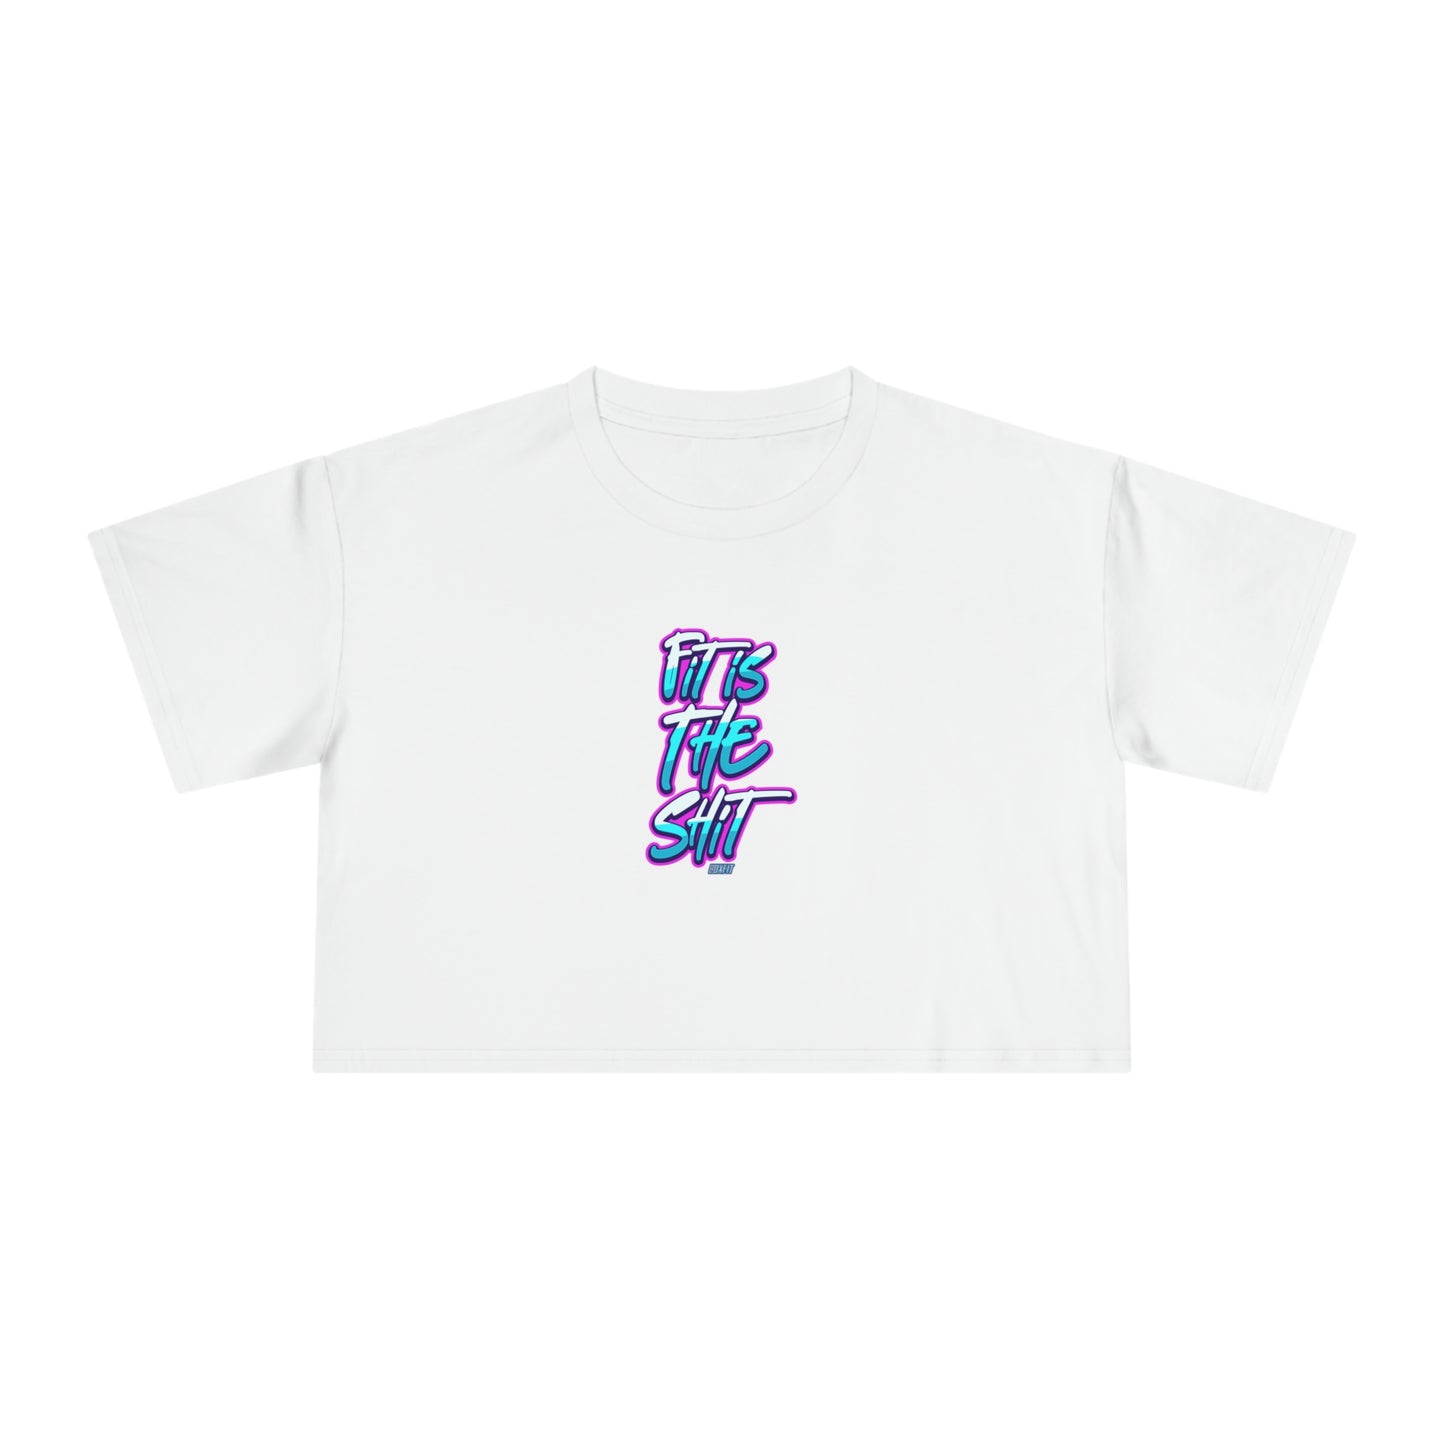 WOMENS BOXFIT FITS THE SHIT CROPPED TEE